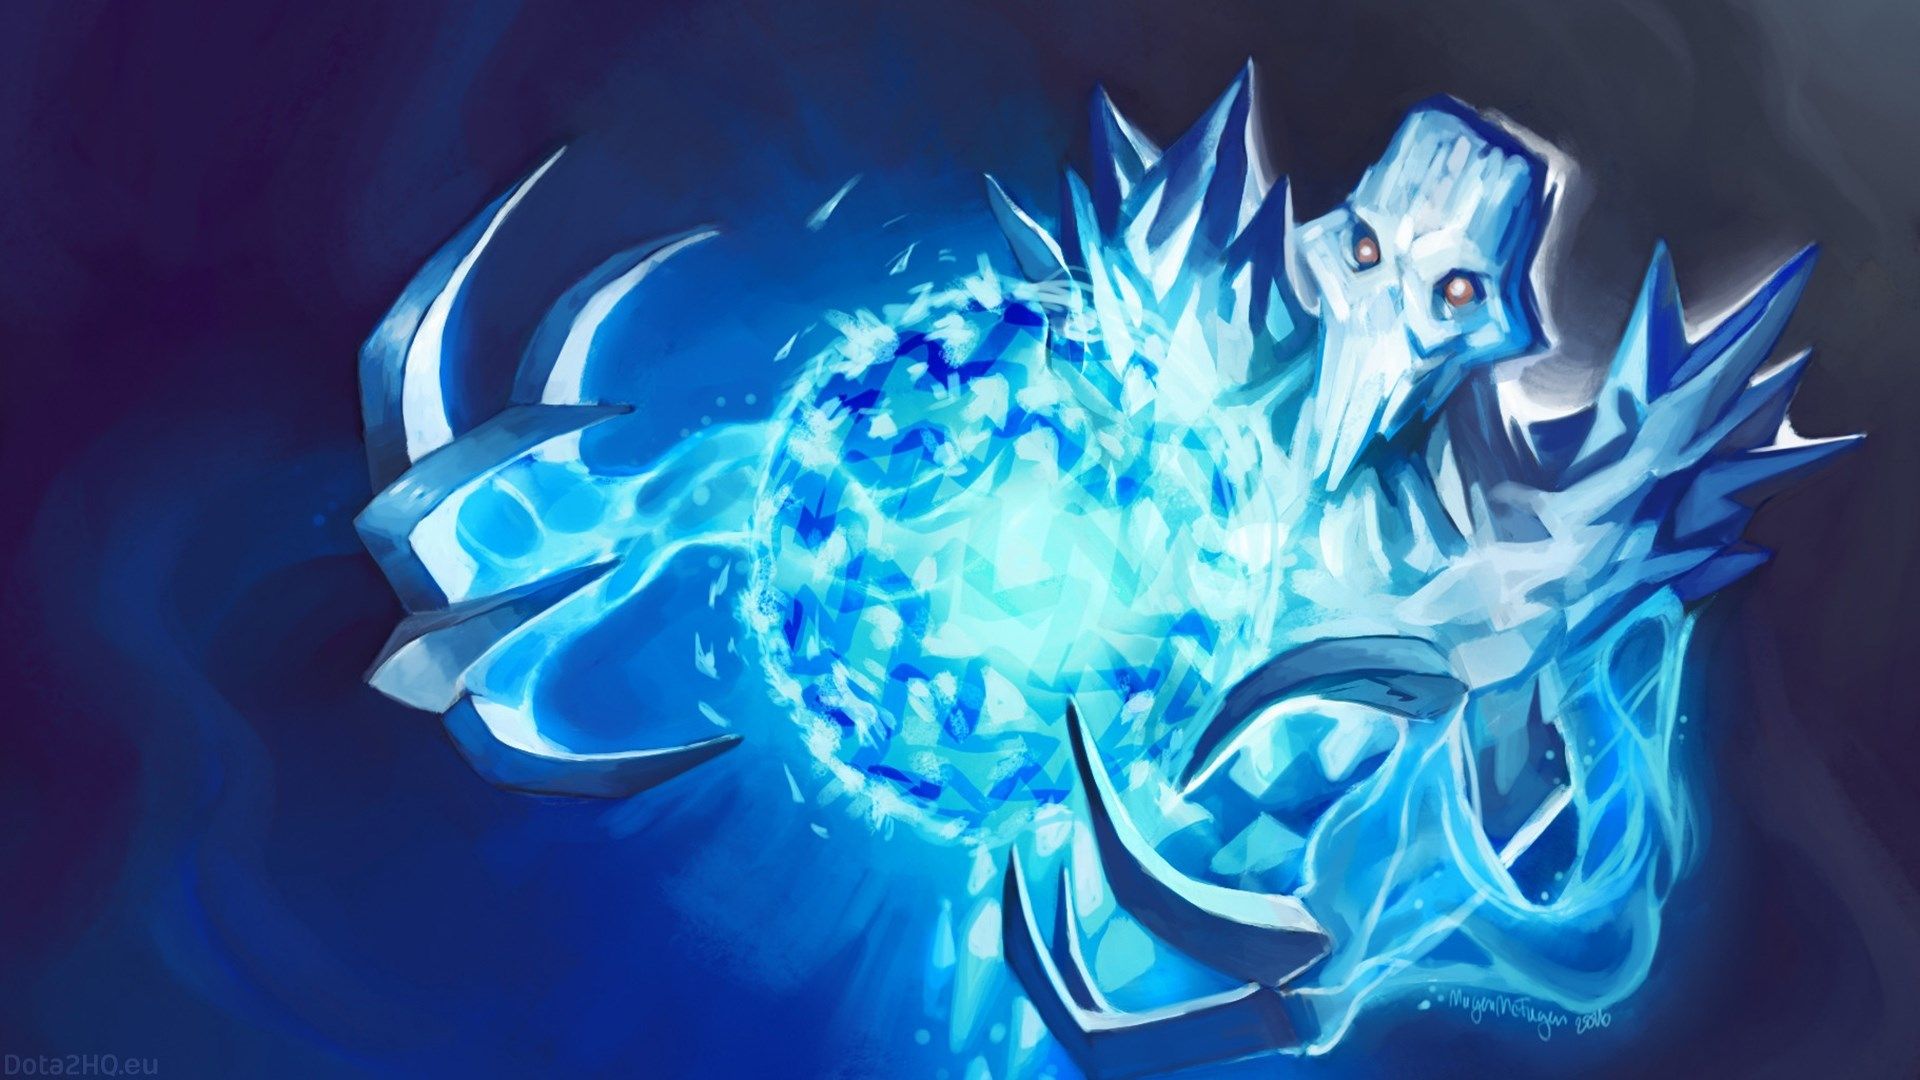 Know More About Ancient Apparation In Dota 2